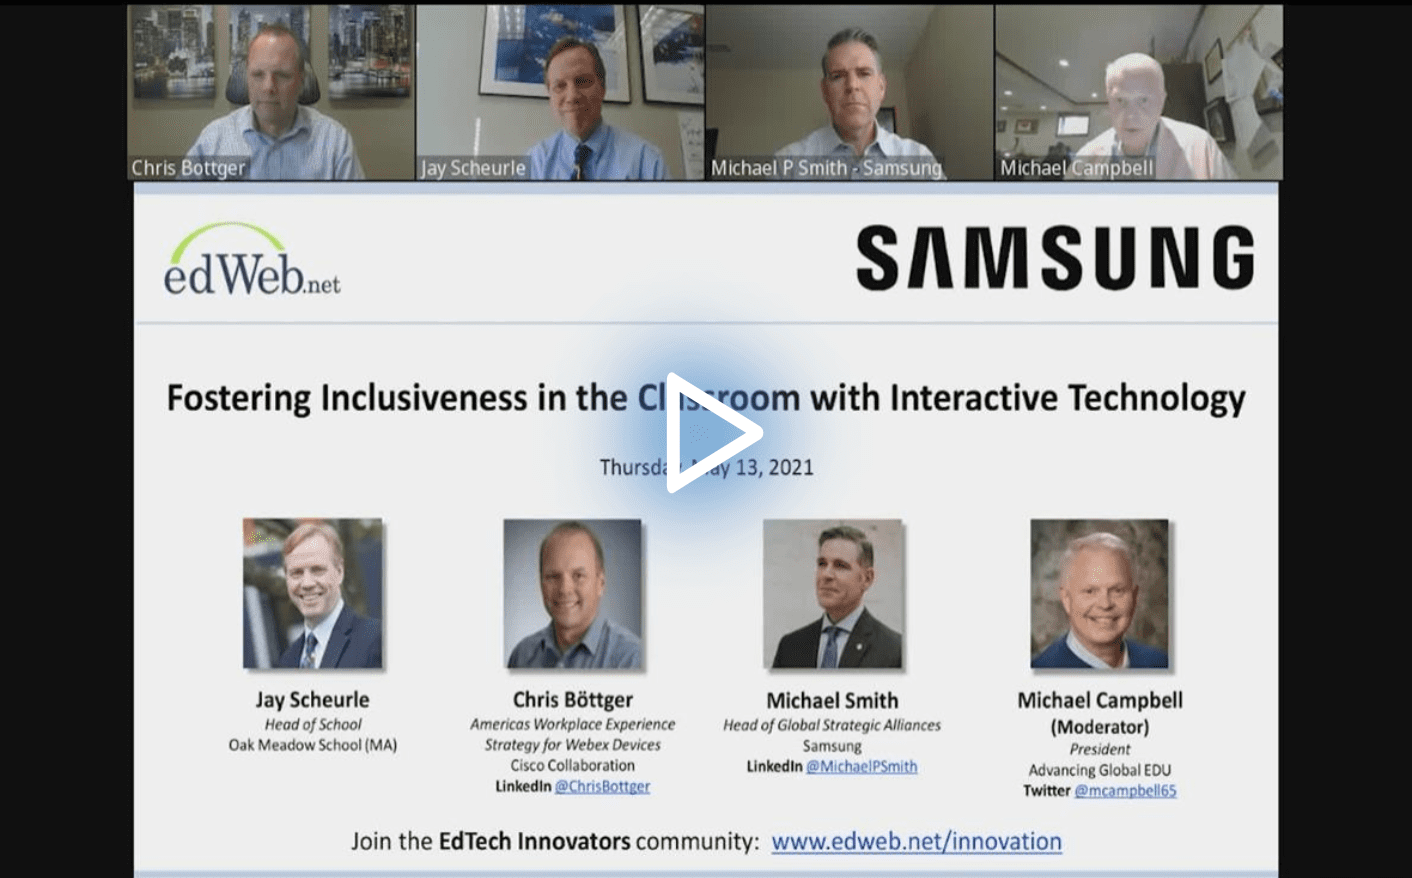 Fostering Inclusiveness in the Classroom with Interactive Technology edWebinar recording link